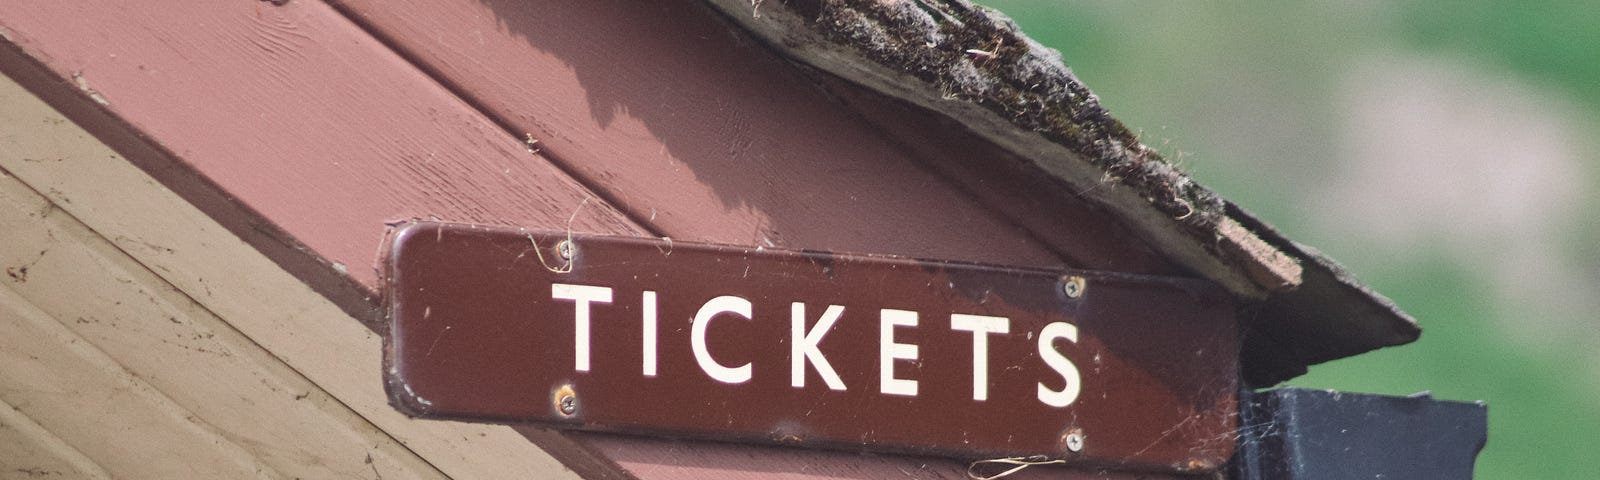 Sign for a ticket booth